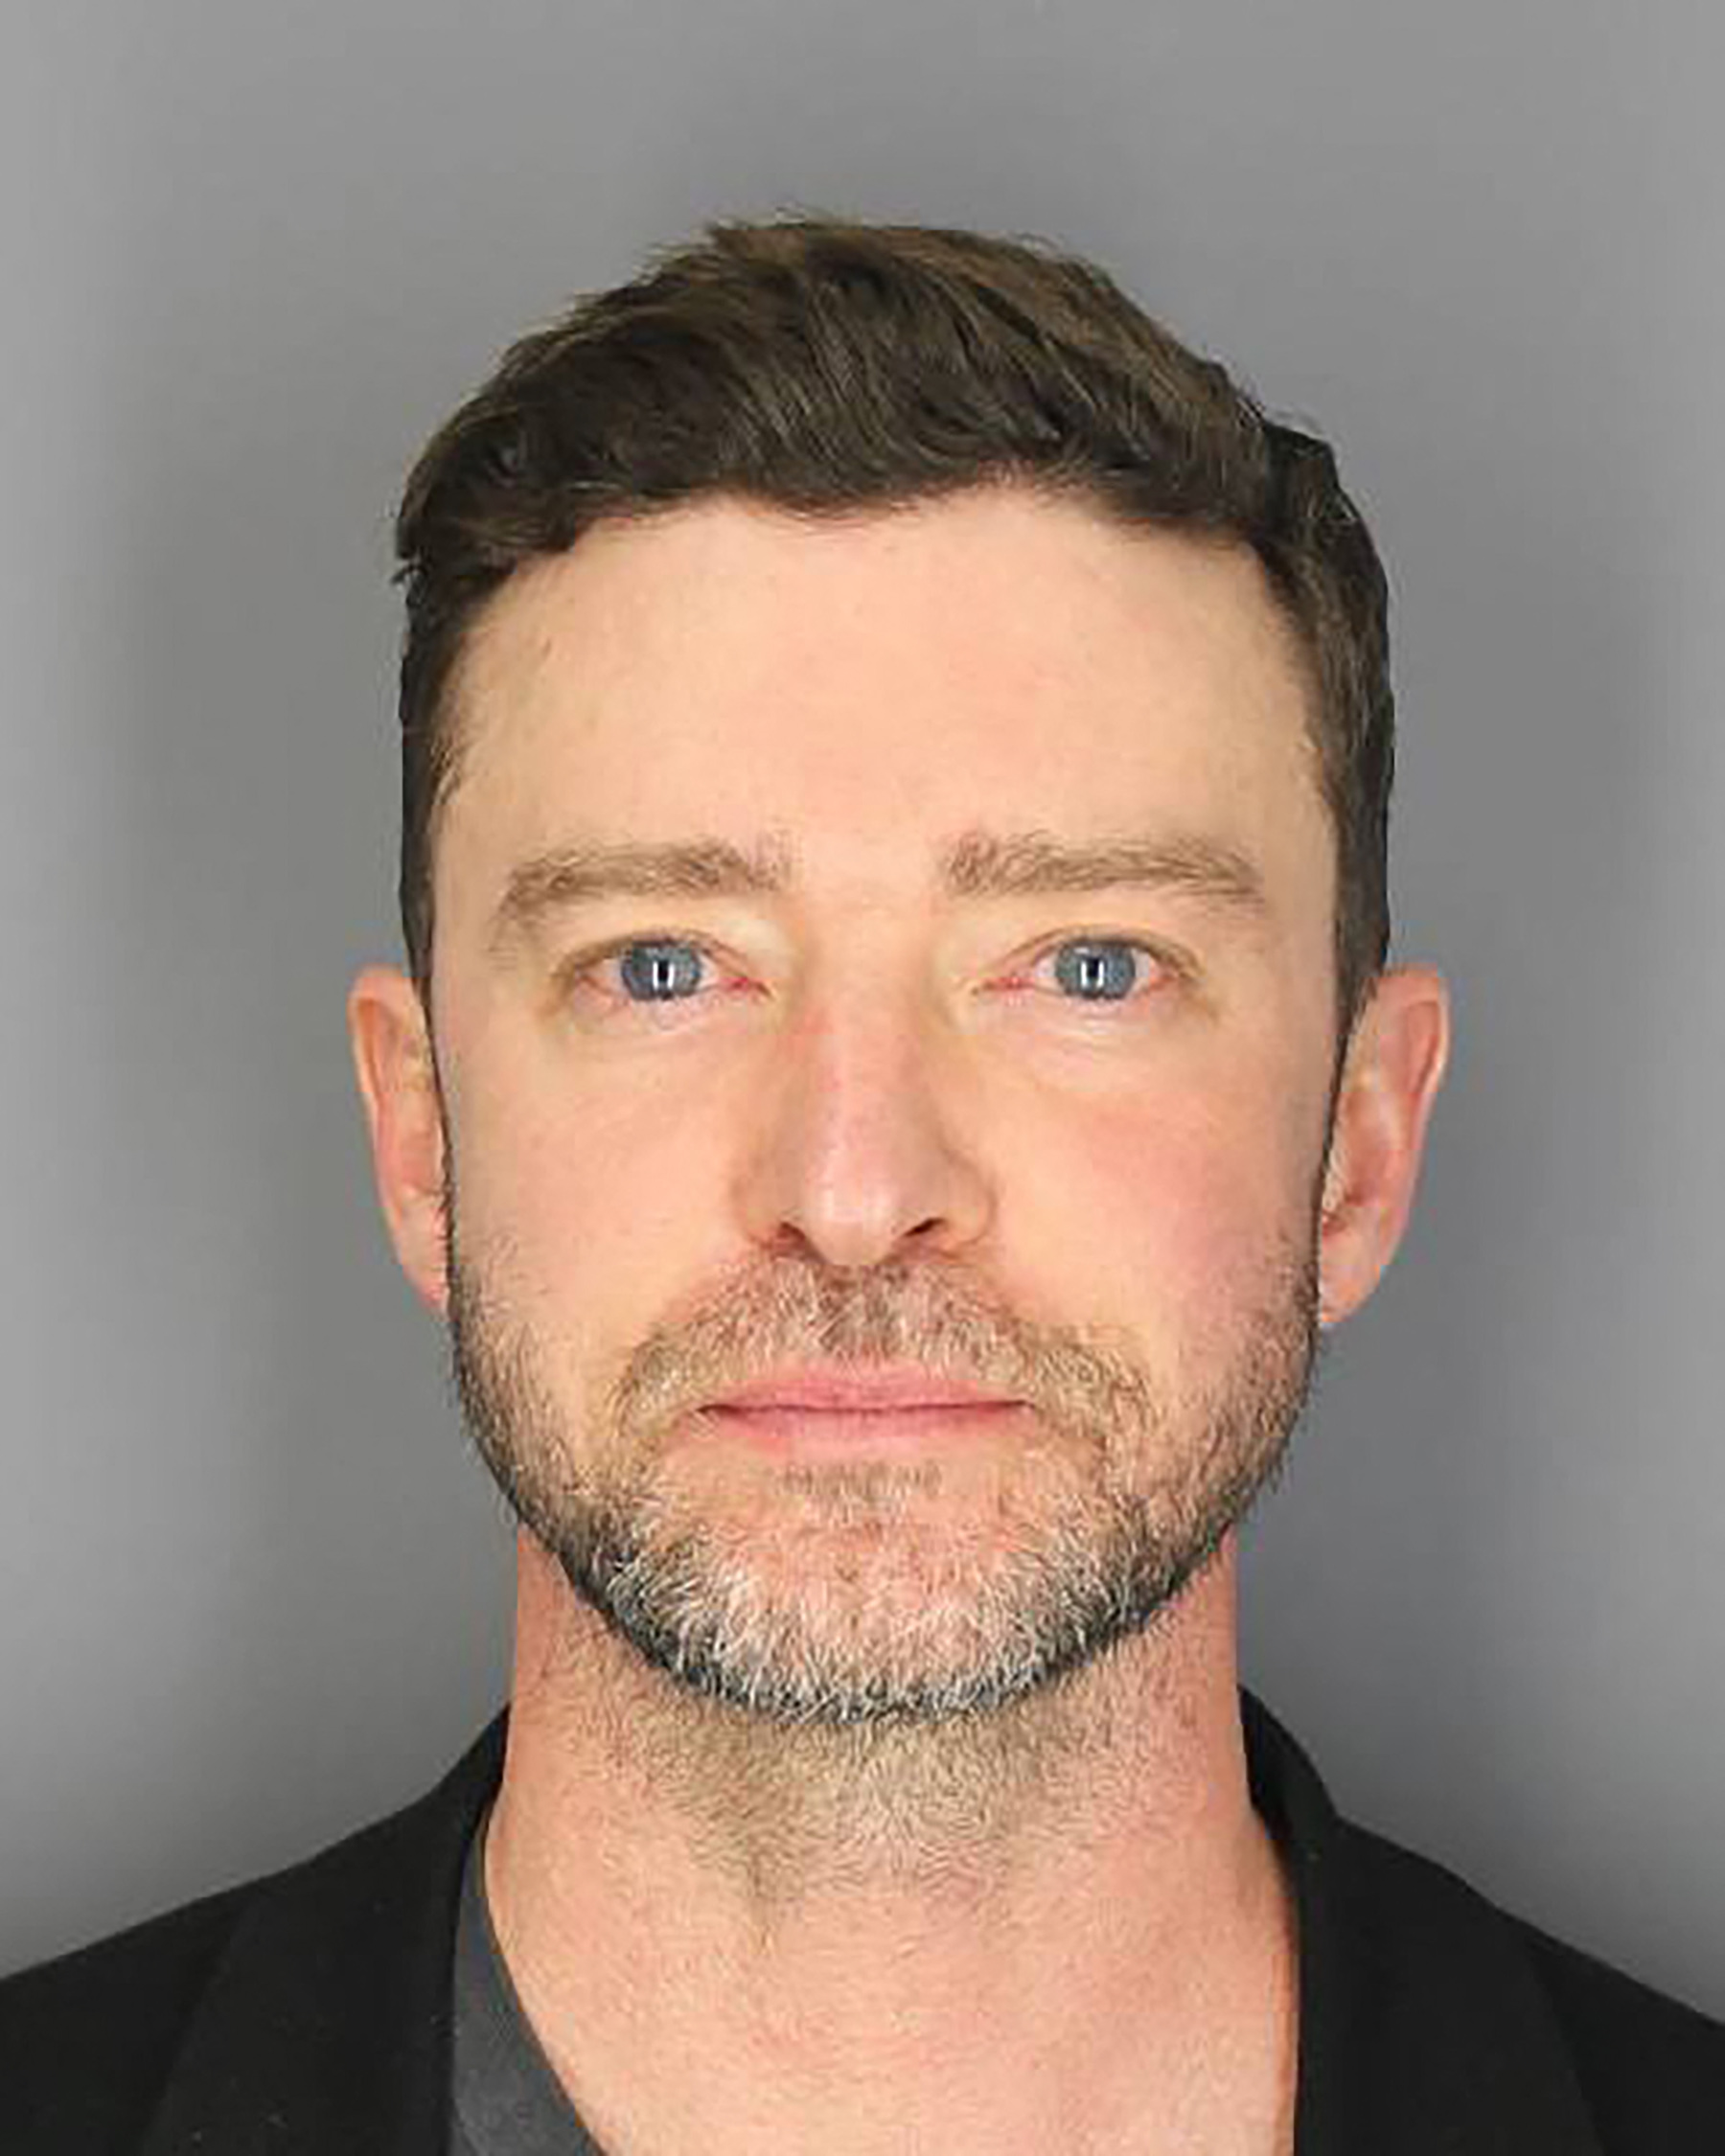 Justin Timberlake was arrested in Sag Harbor, New York, and charged with driving while intoxicated